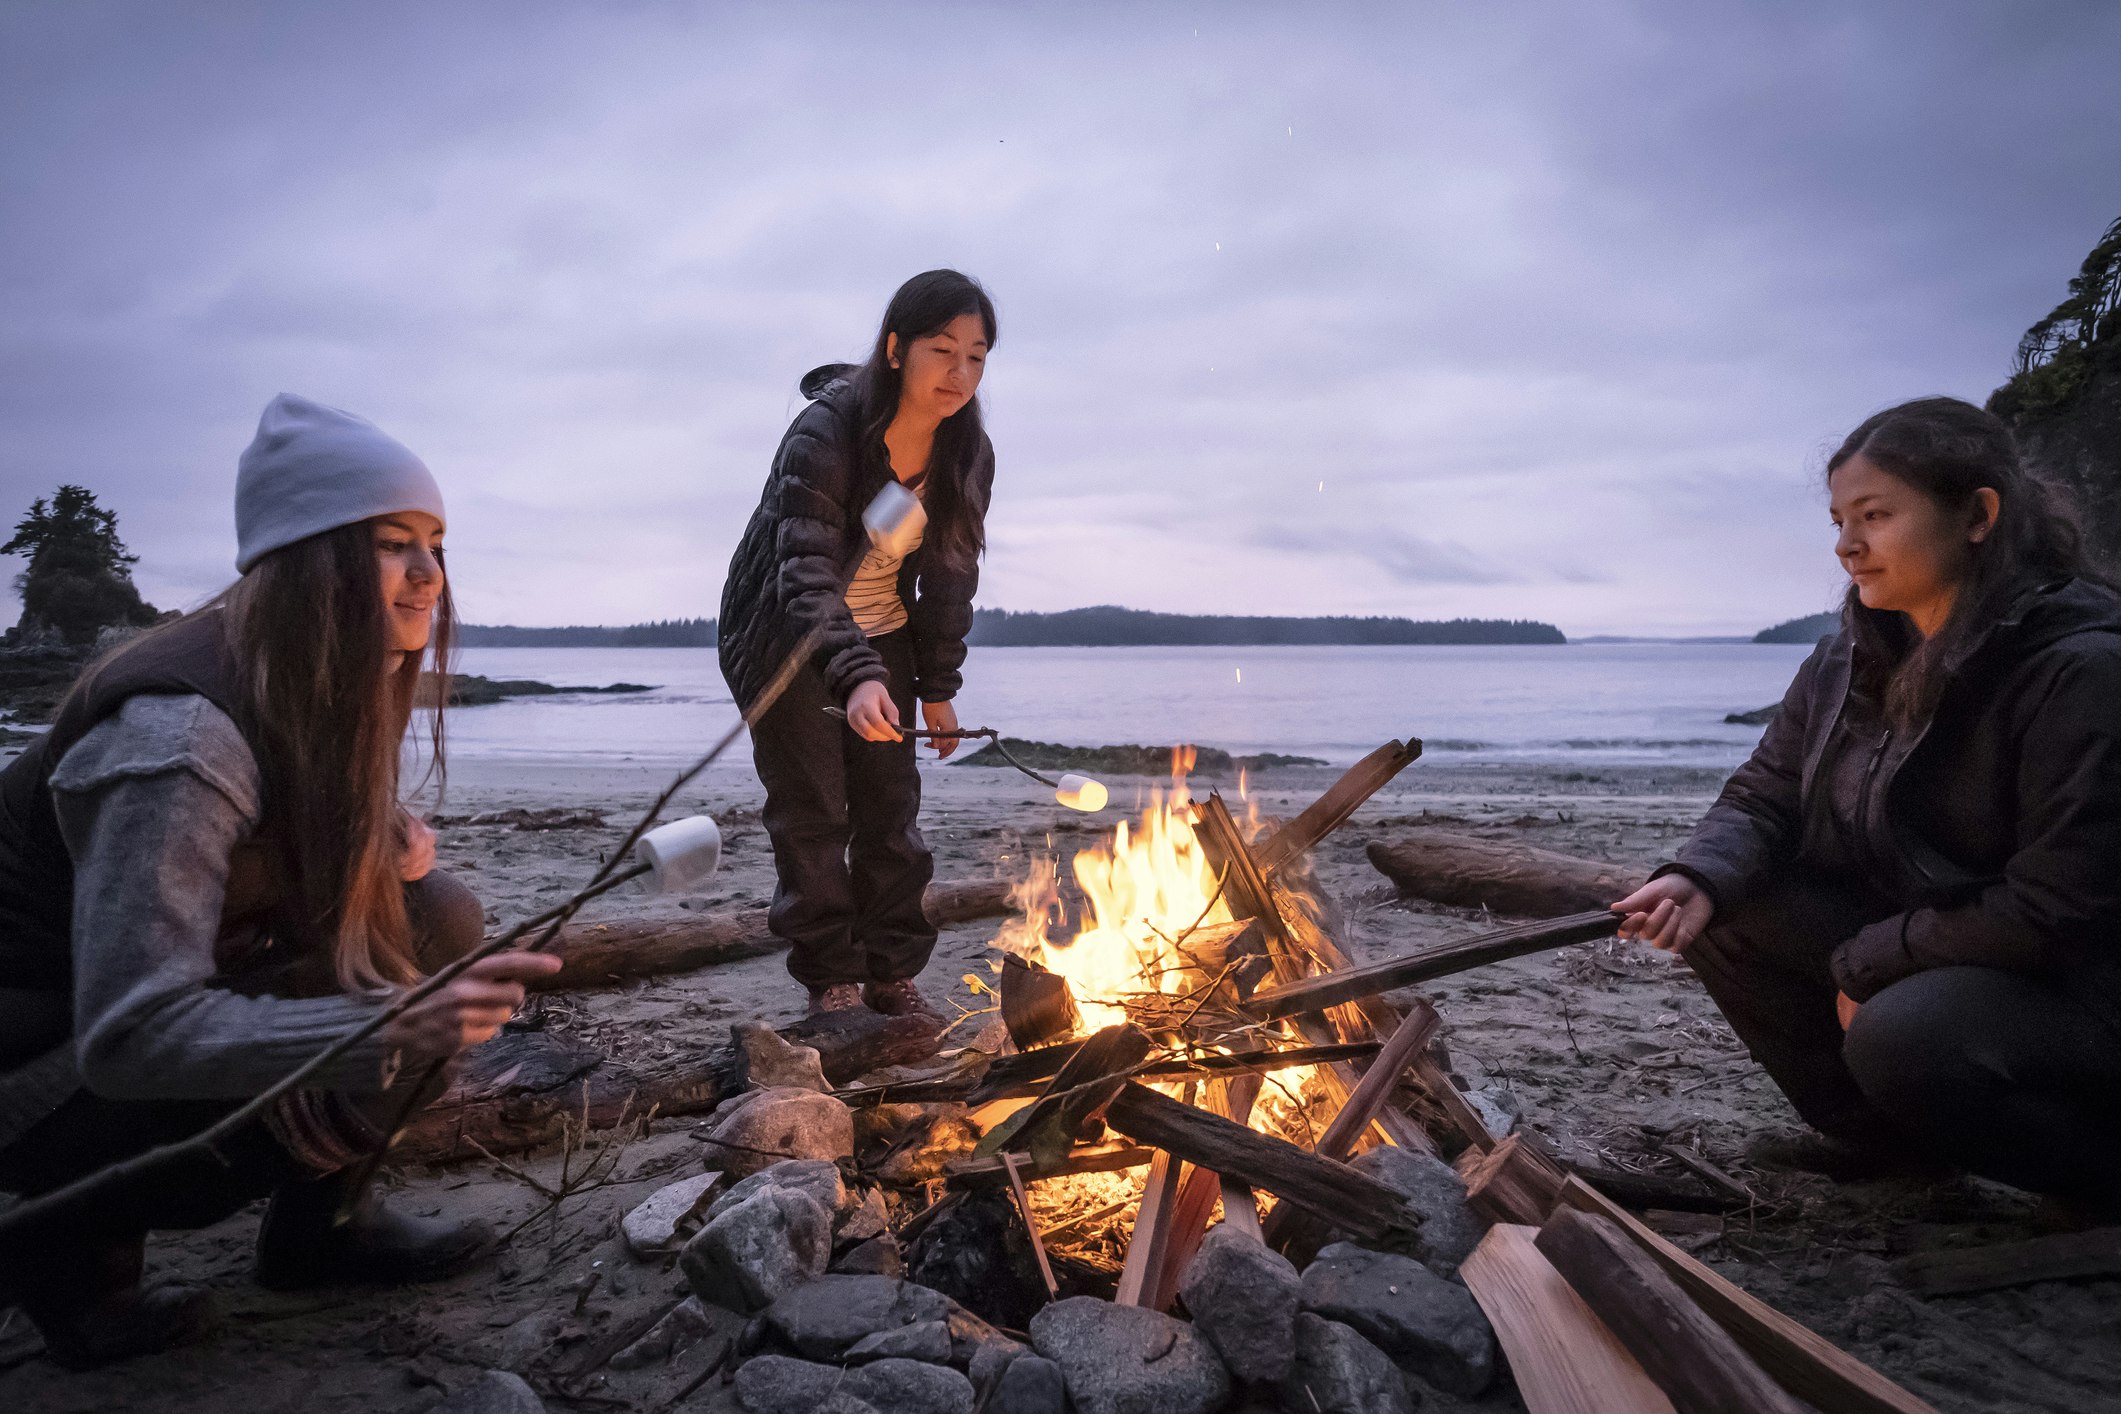 Young women roasting marshmallows on a campfire on a remote beach